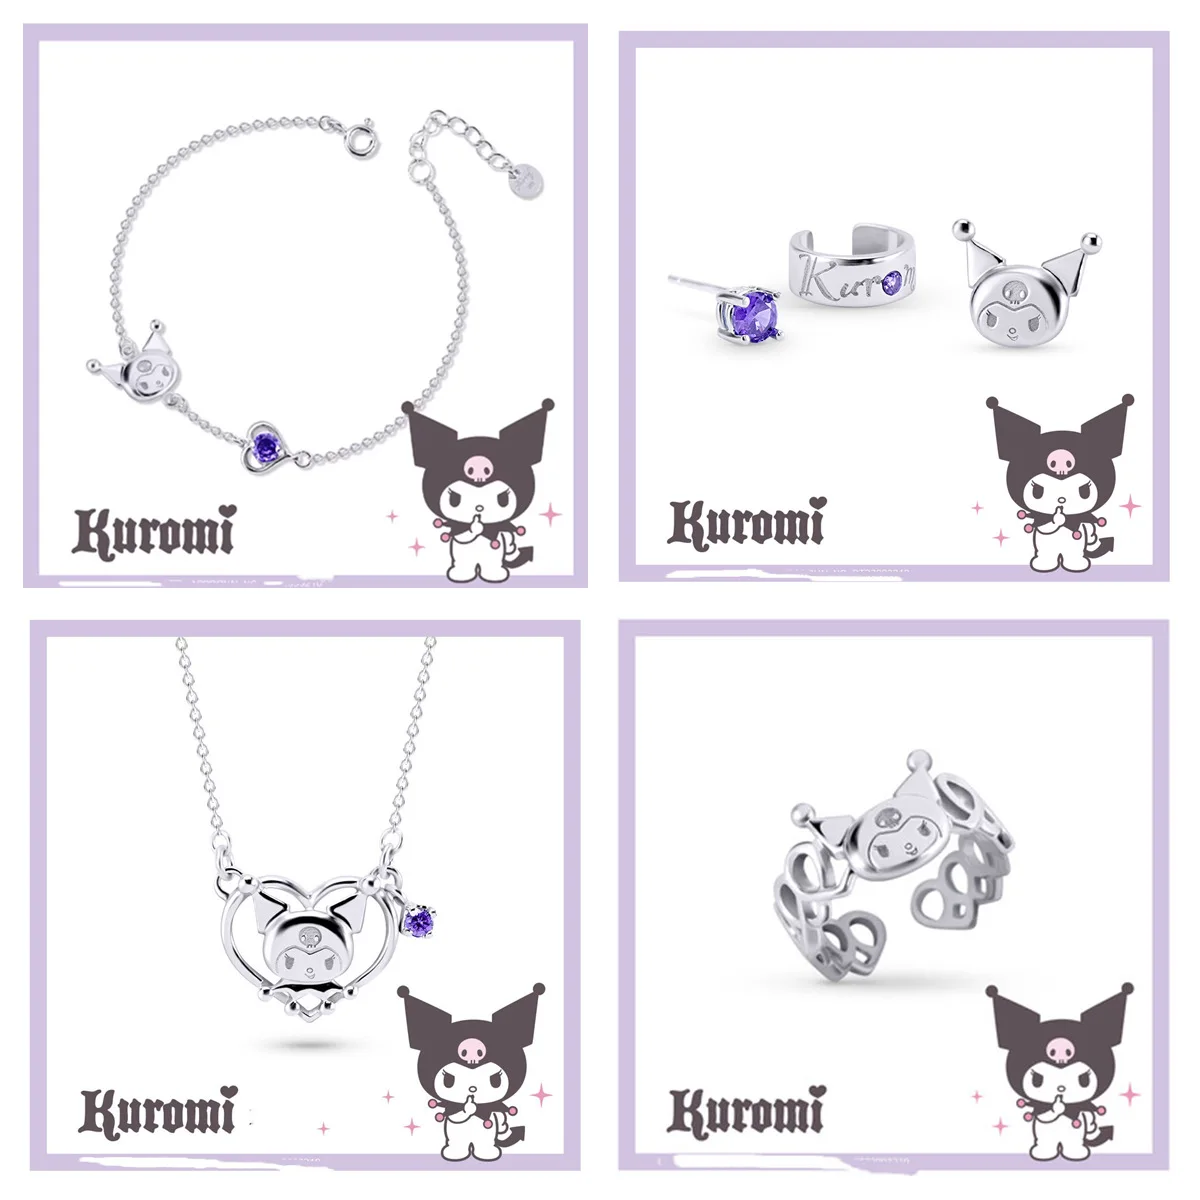 Sanrio Y2k Accessories Kuromi Necklace Bracelet Ring Earrings Set Hello Kity Necklace Kawaii Productos Cute Things For Girls finest brown pu leather bracelet pendant necklace jewellery display counter stand holder bust ring earrings presentation shelf